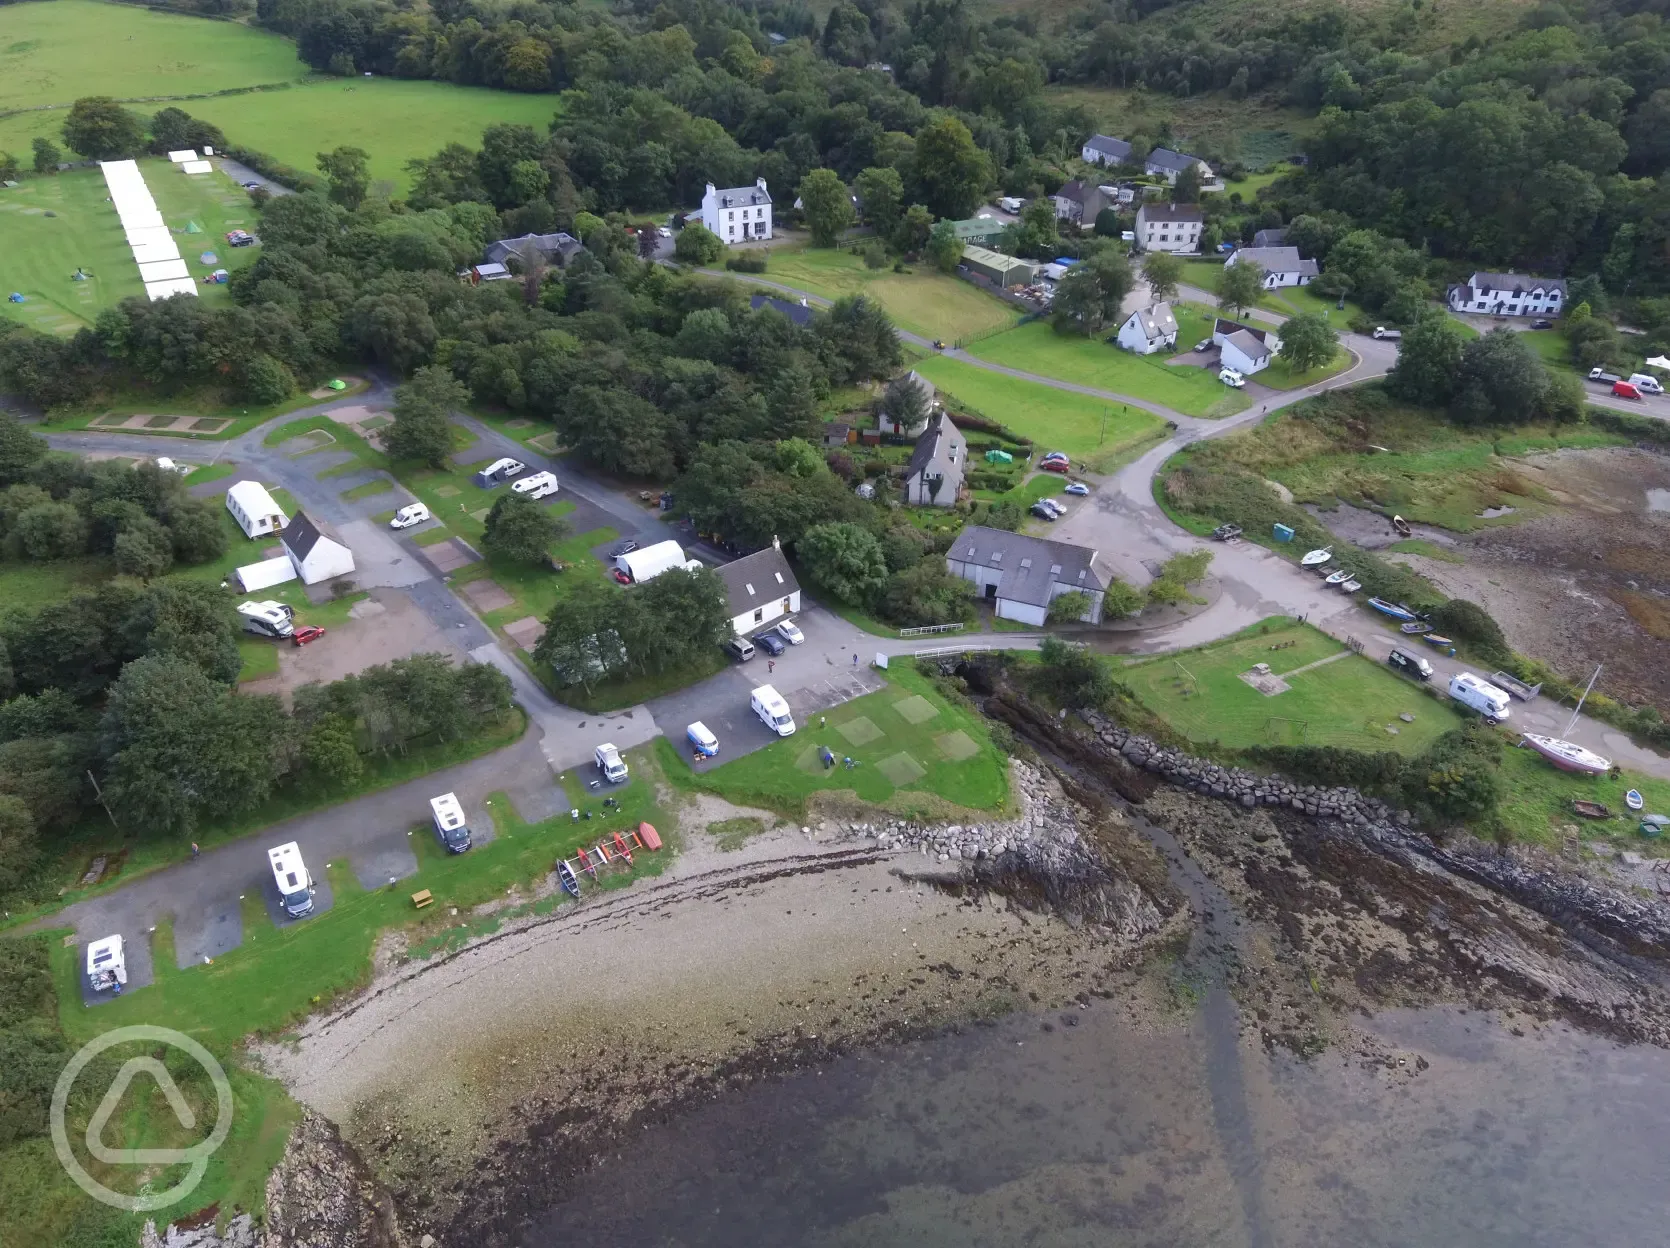 Birds eye view of Shieling Holidays on the Isle of Mull